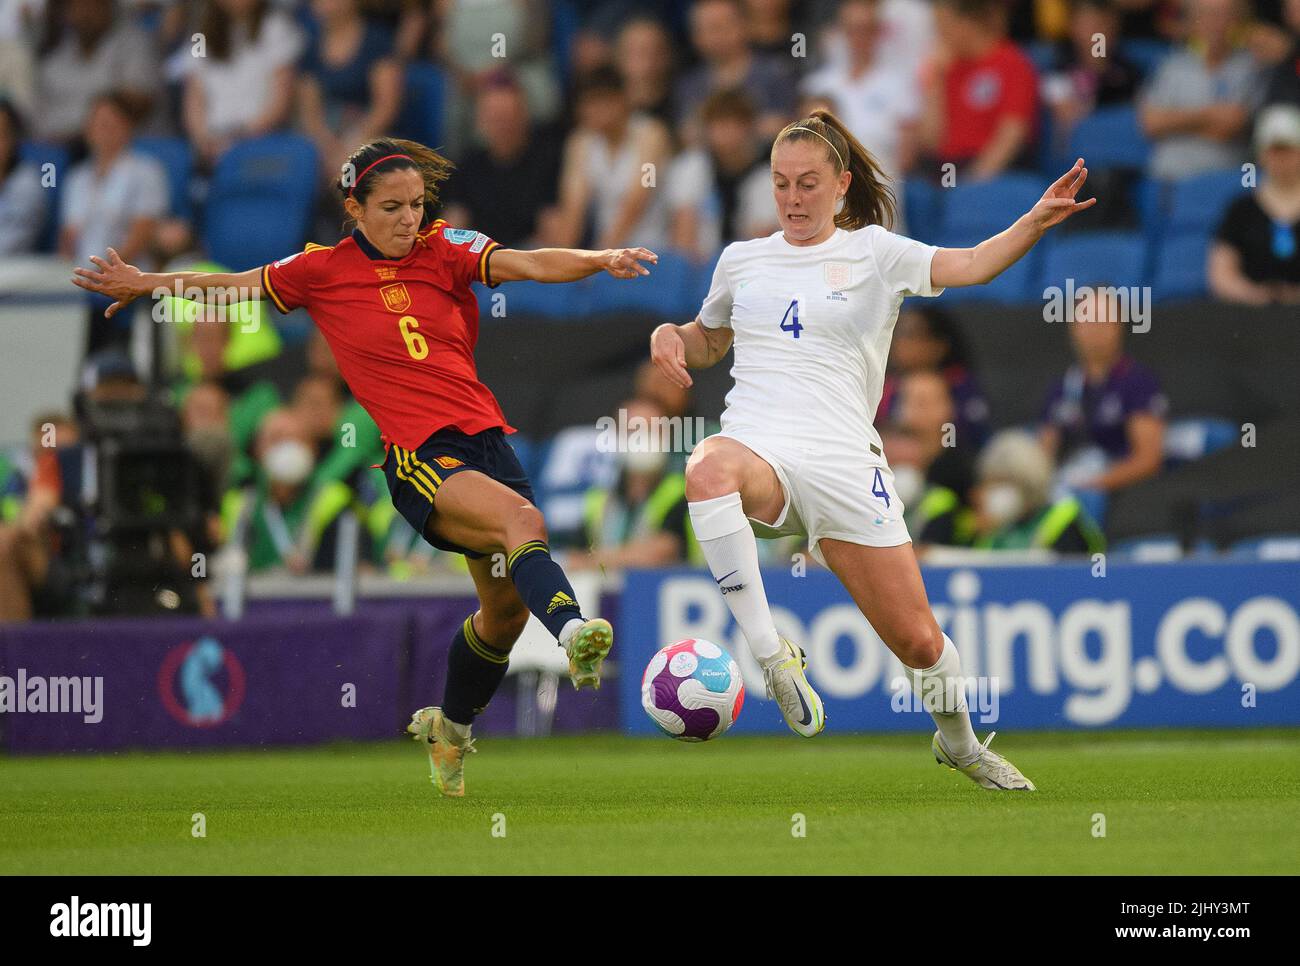 20 Jul 2022 - England v Spain - UEFA Women's Euro 2022 - Quarter Final - Brighton & Hove Community Stadium  England's Keira Walsh and Spain's Altana Bonmati during the match against Spain.  Picture Credit : © Mark Pain / Alamy Live News Stock Photo